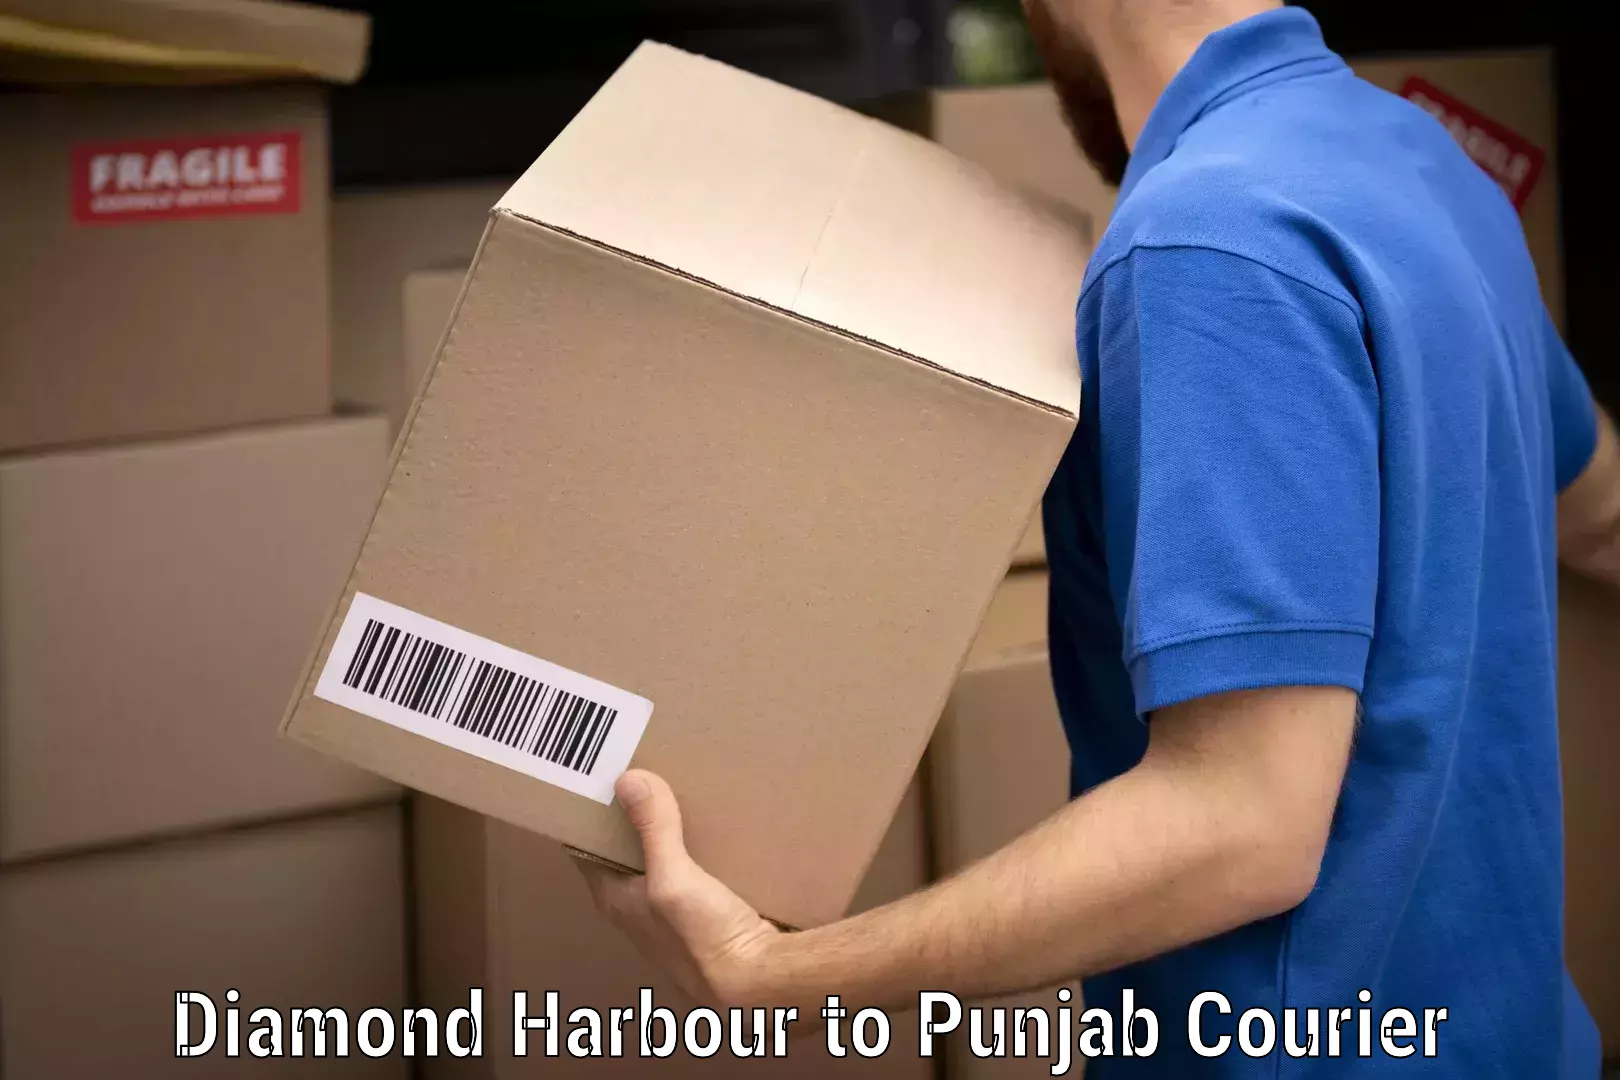 Specialized moving company Diamond Harbour to Punjab